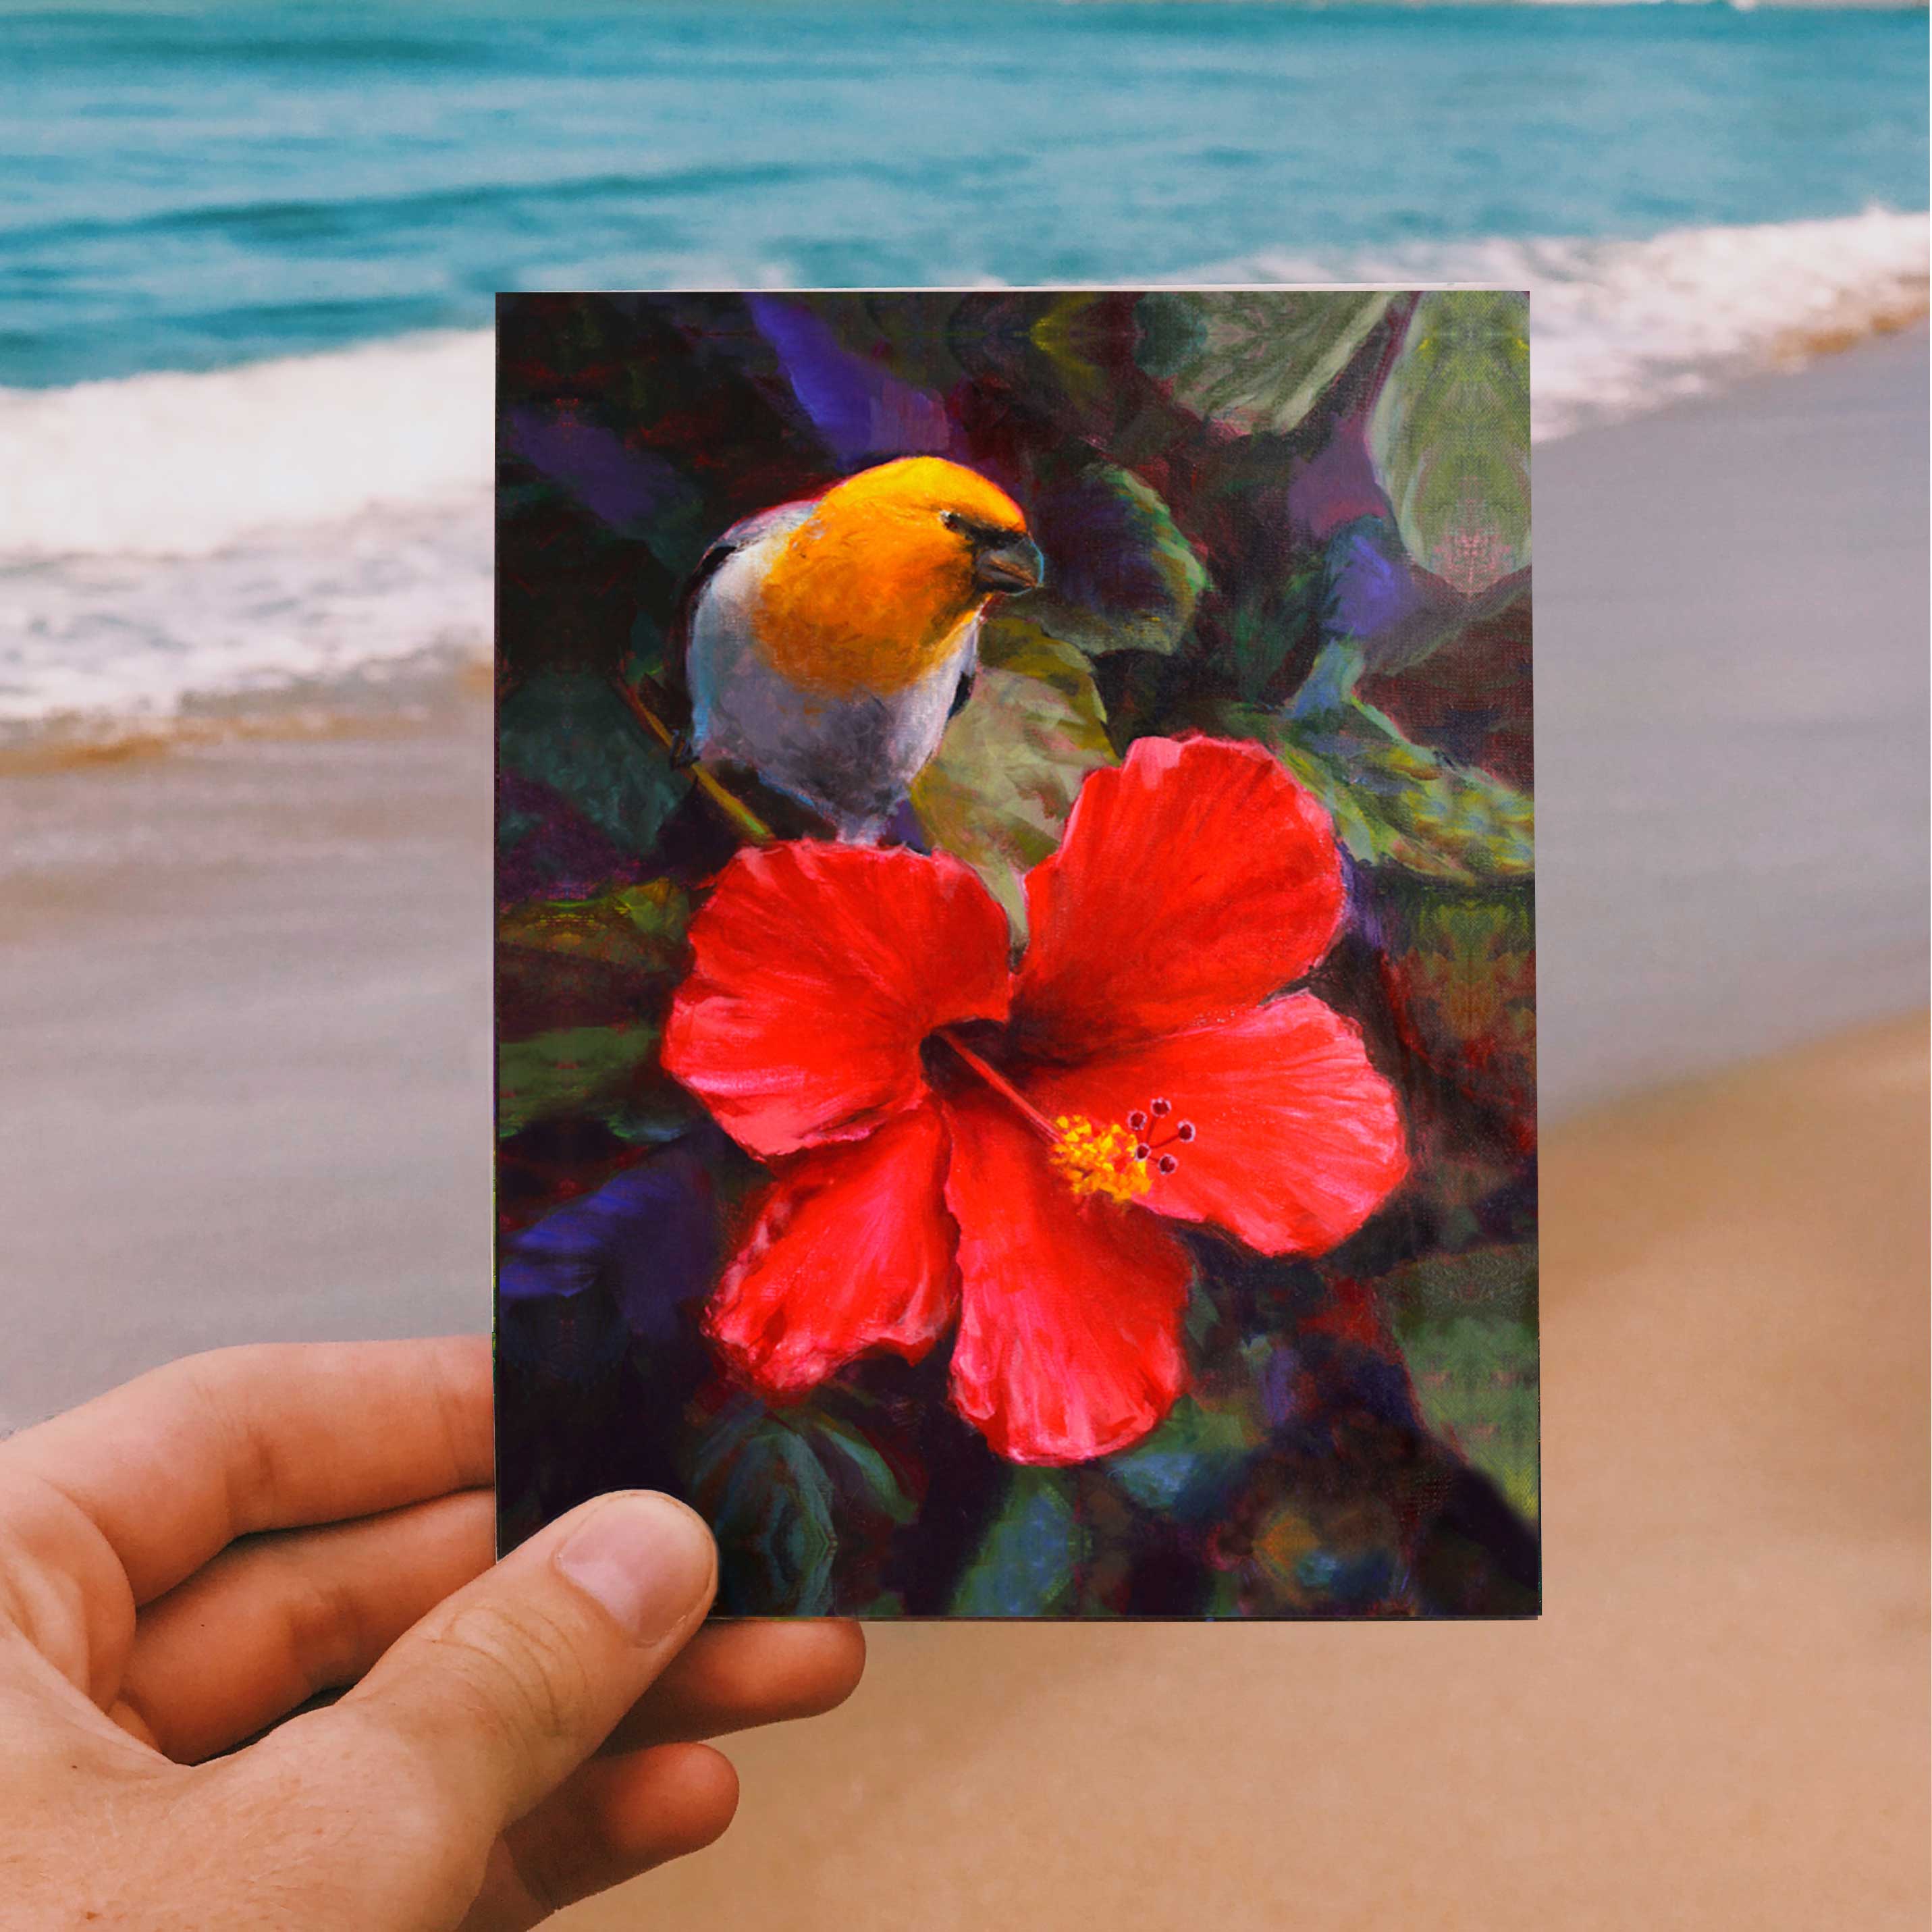 Hand holding an envelope and card featuring art of a tropical Hawaiian Hibiscus flower and an endemic Palila bird on beach background